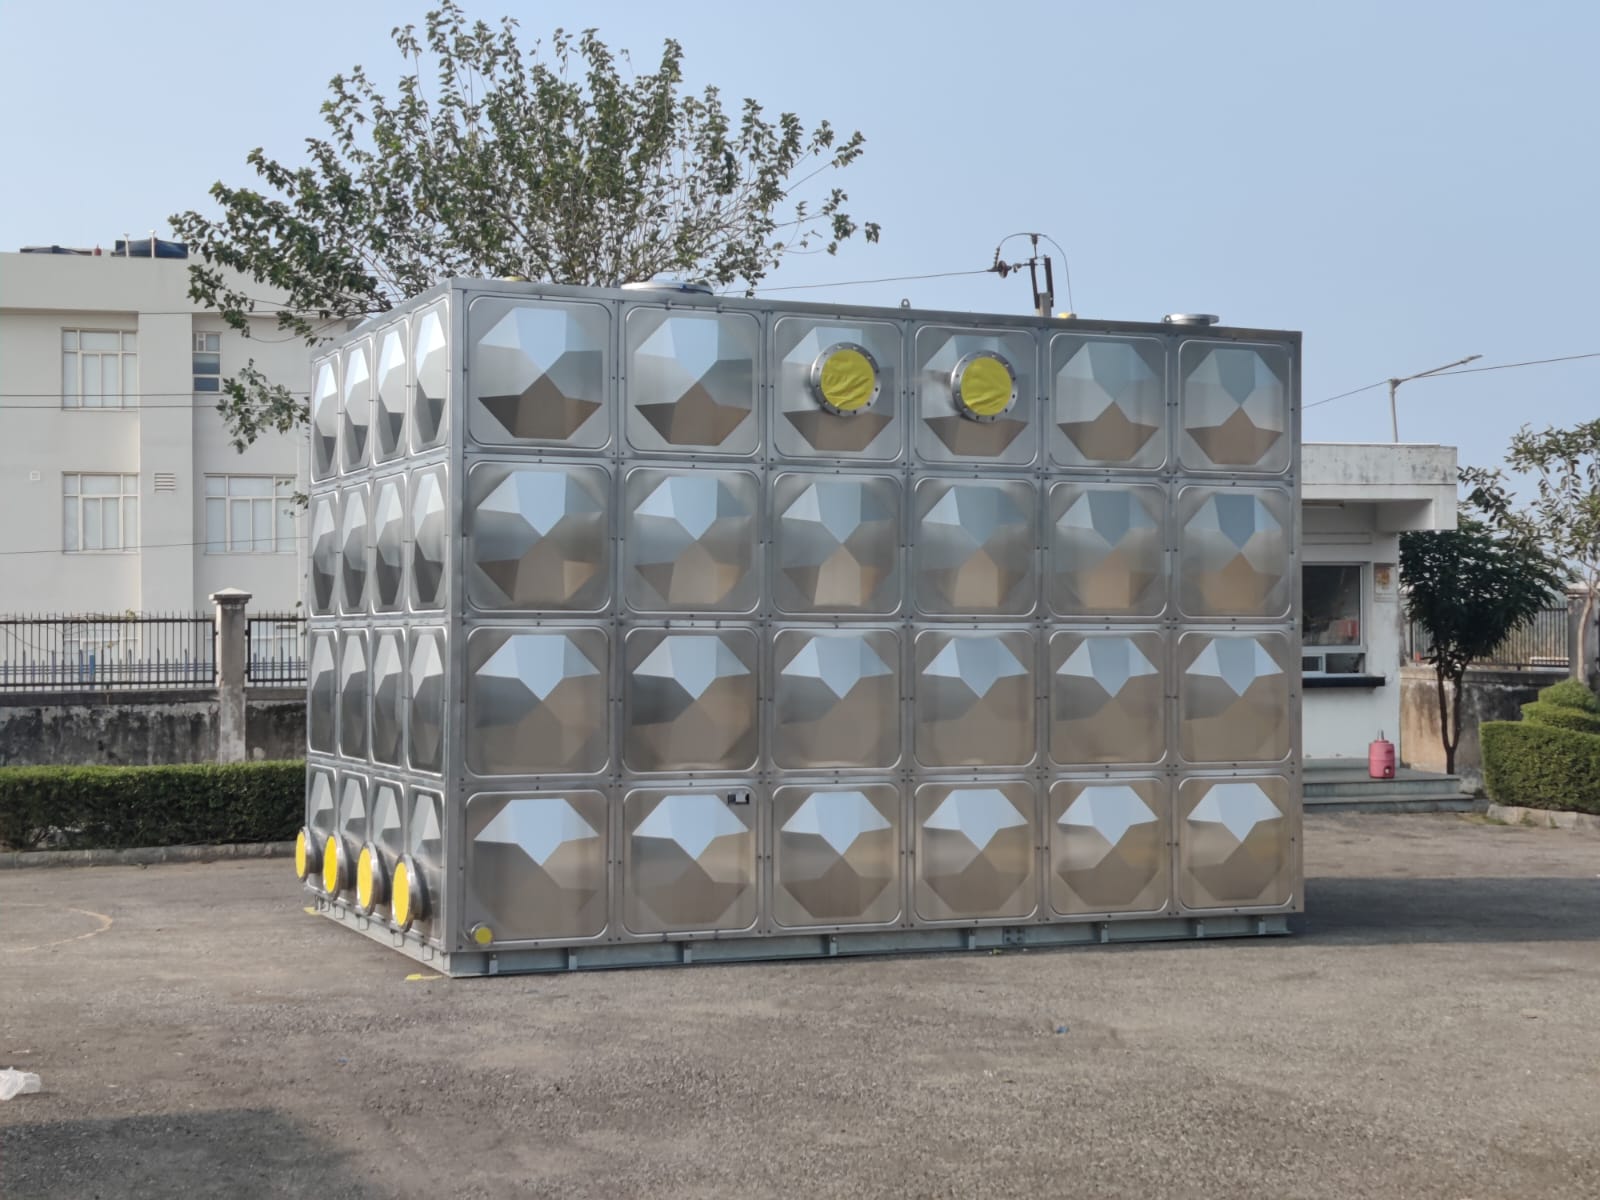 Stainless Steel Water Storage Tank of size of 4x6x4 meters for Thermal Storage Water Storage by Beltecno India.